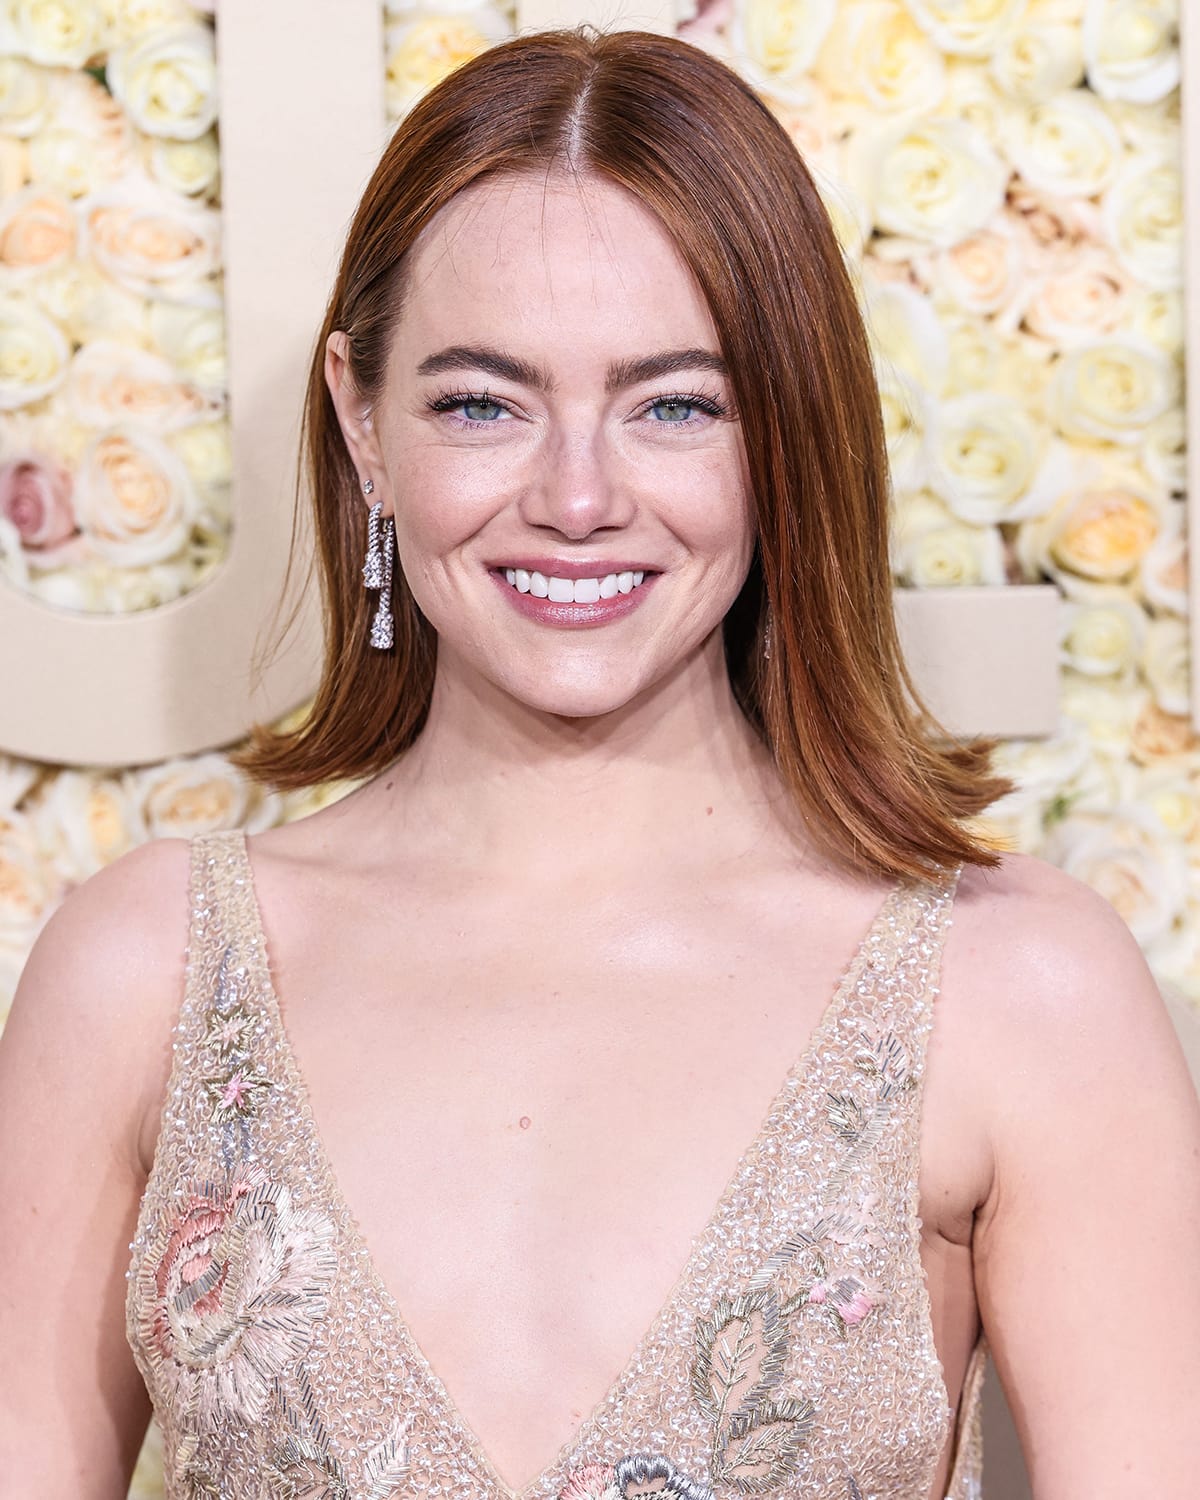 Emma Stone looks beautiful with her lightweight bob, mascara, and rosy makeup using Charlotte Tilbury